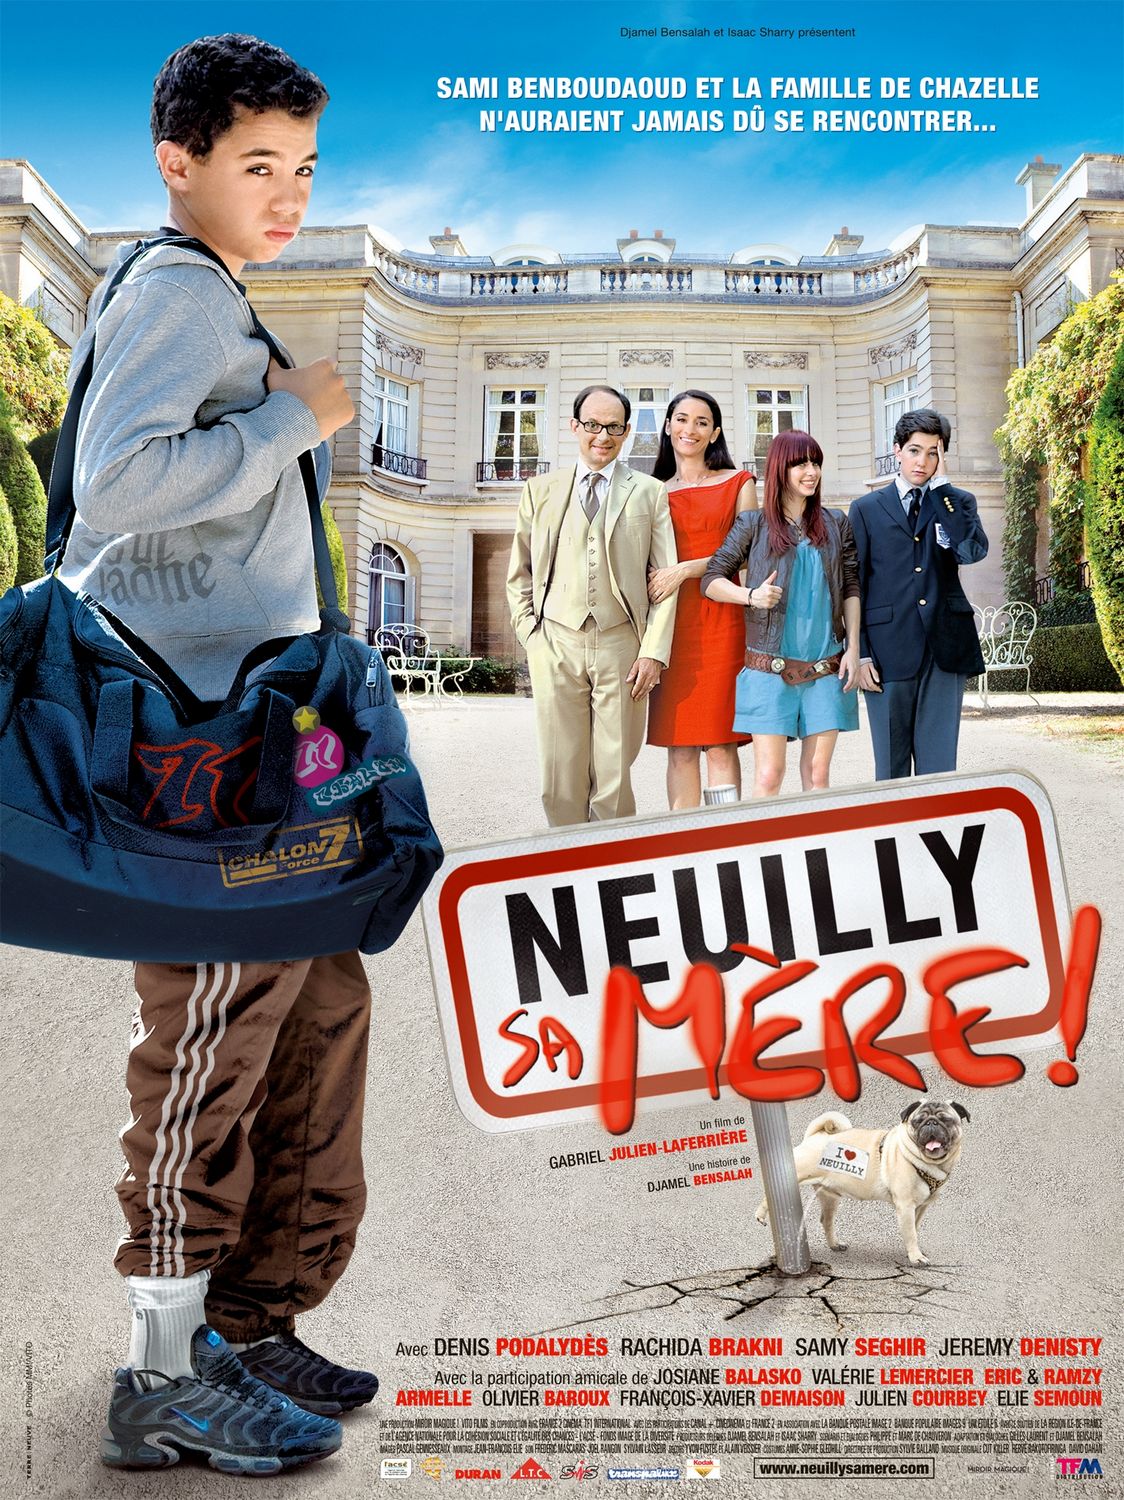 Extra Large Movie Poster Image for Neuilly sa mère! 